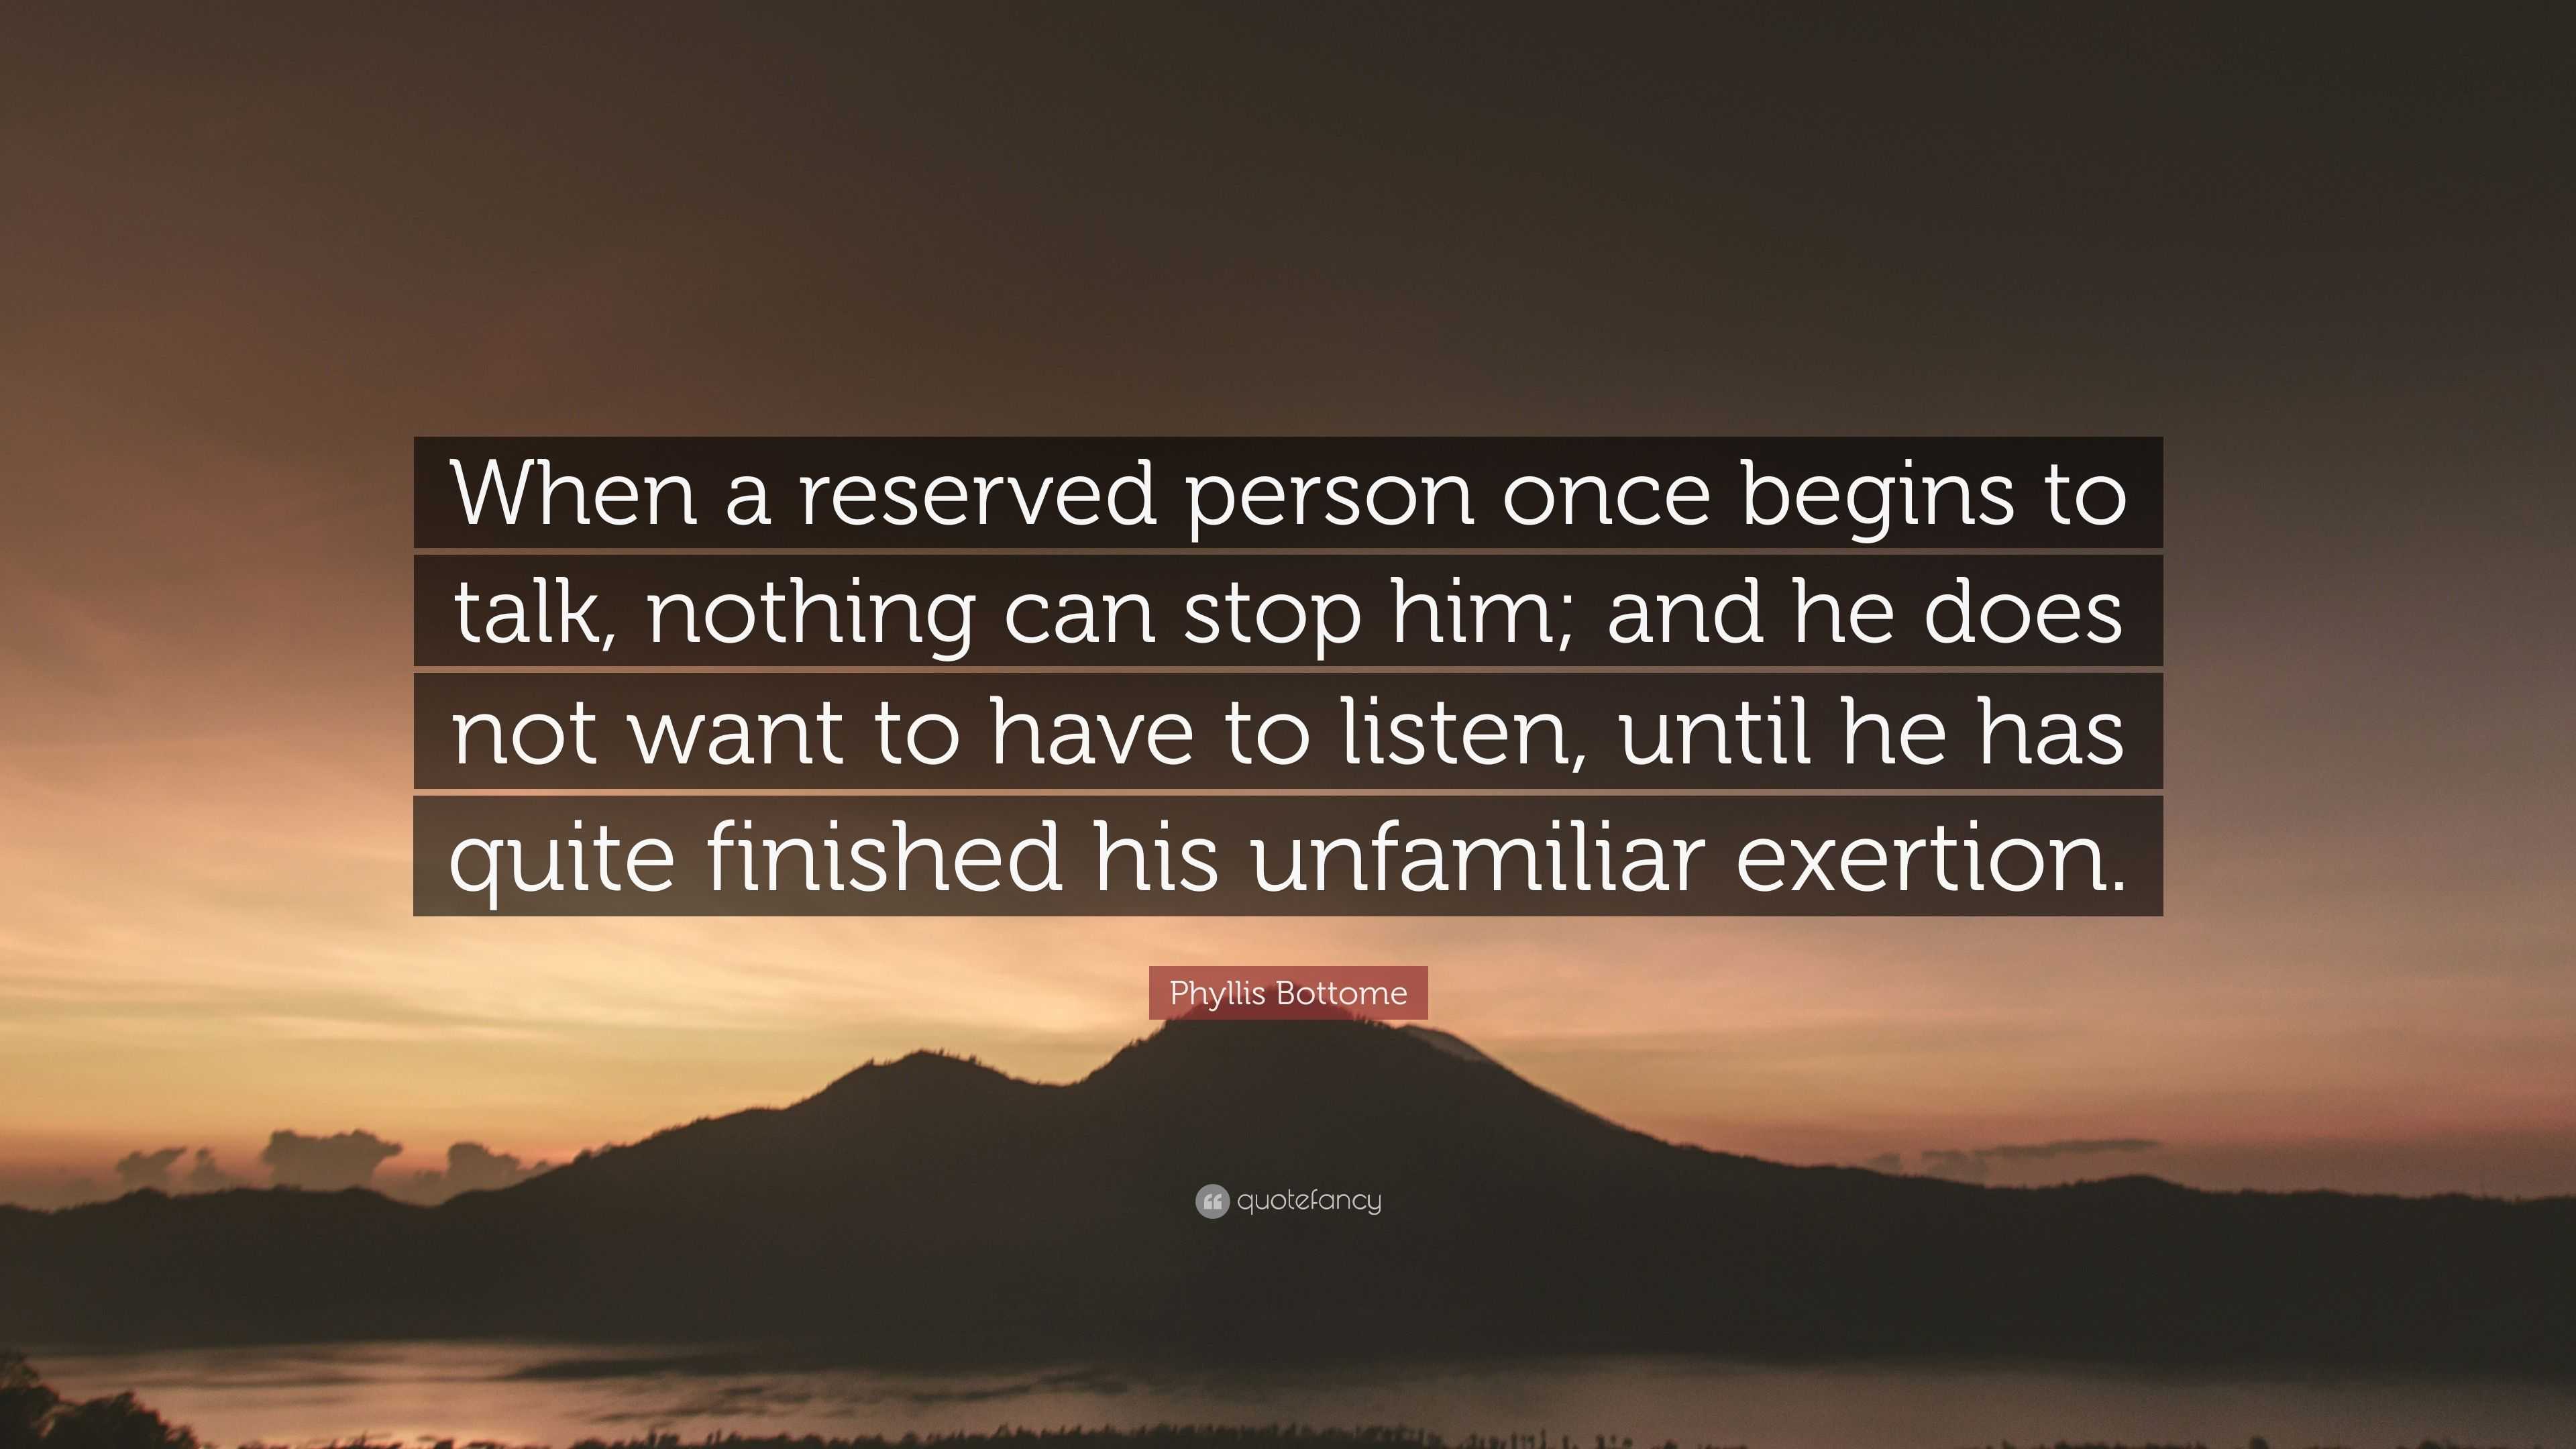 Phyllis Bottome Quote: “When a reserved person once begins to talk ...